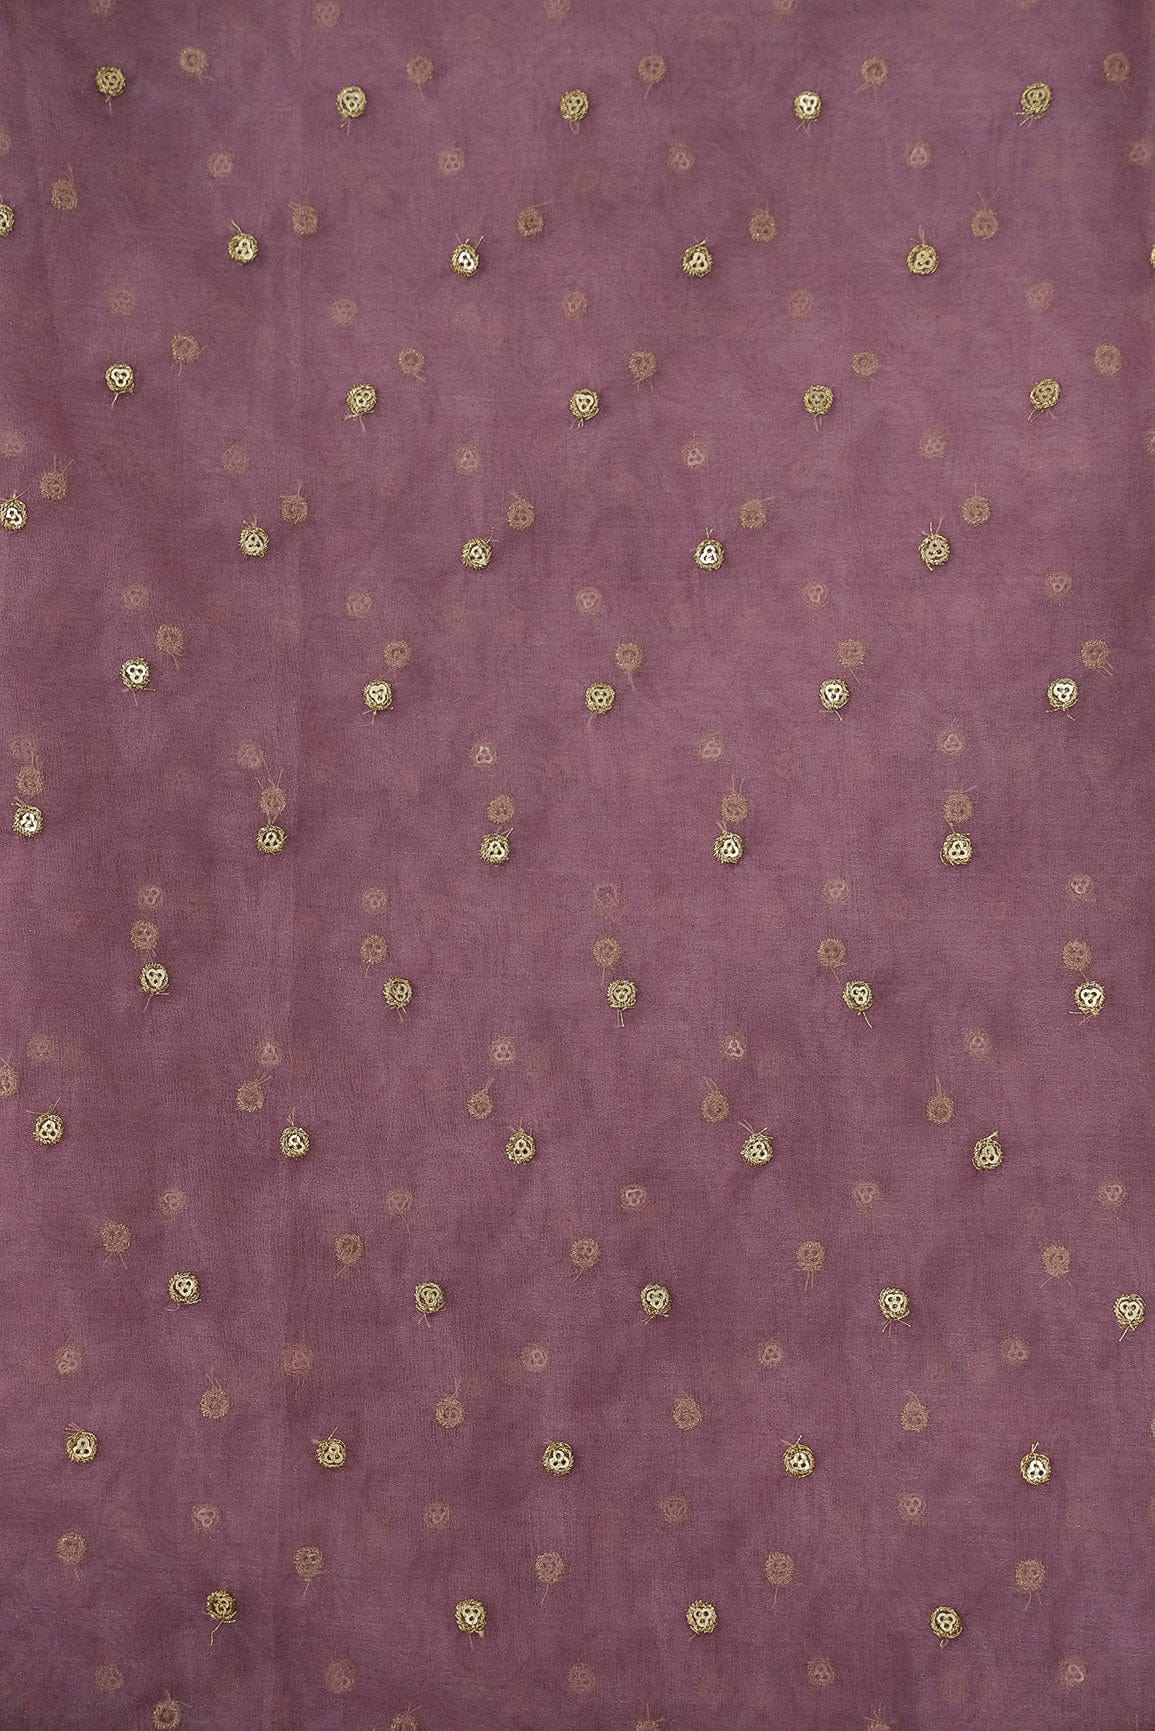 doeraa Embroidery Fabrics Gold Sequins with Gold Thread Motif Embroidery on Purple Organza Fabric